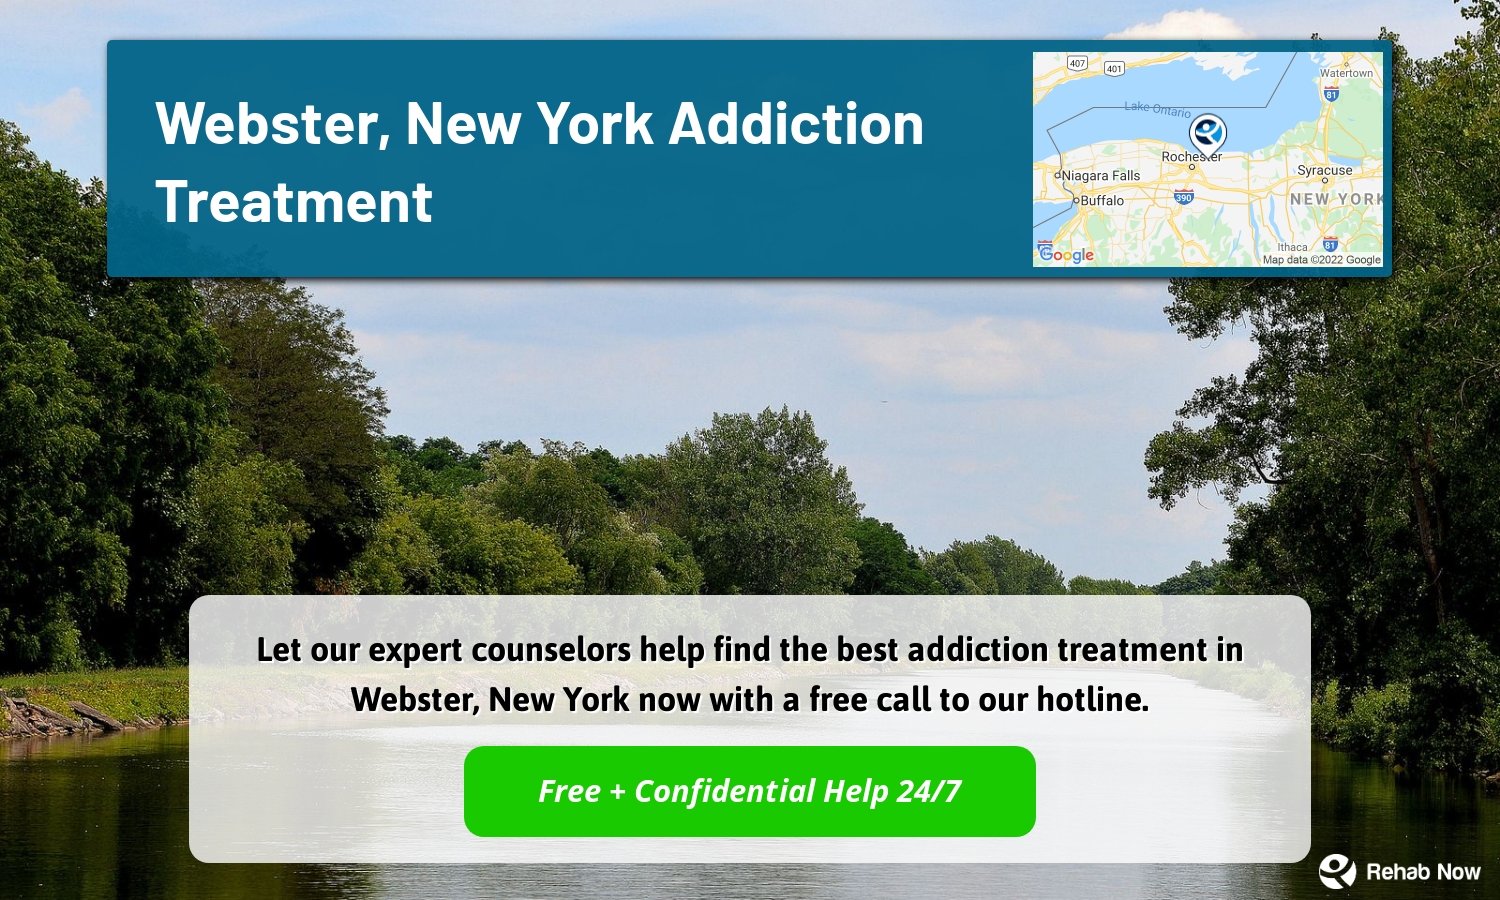 Let our expert counselors help find the best addiction treatment in Webster, New York now with a free call to our hotline.